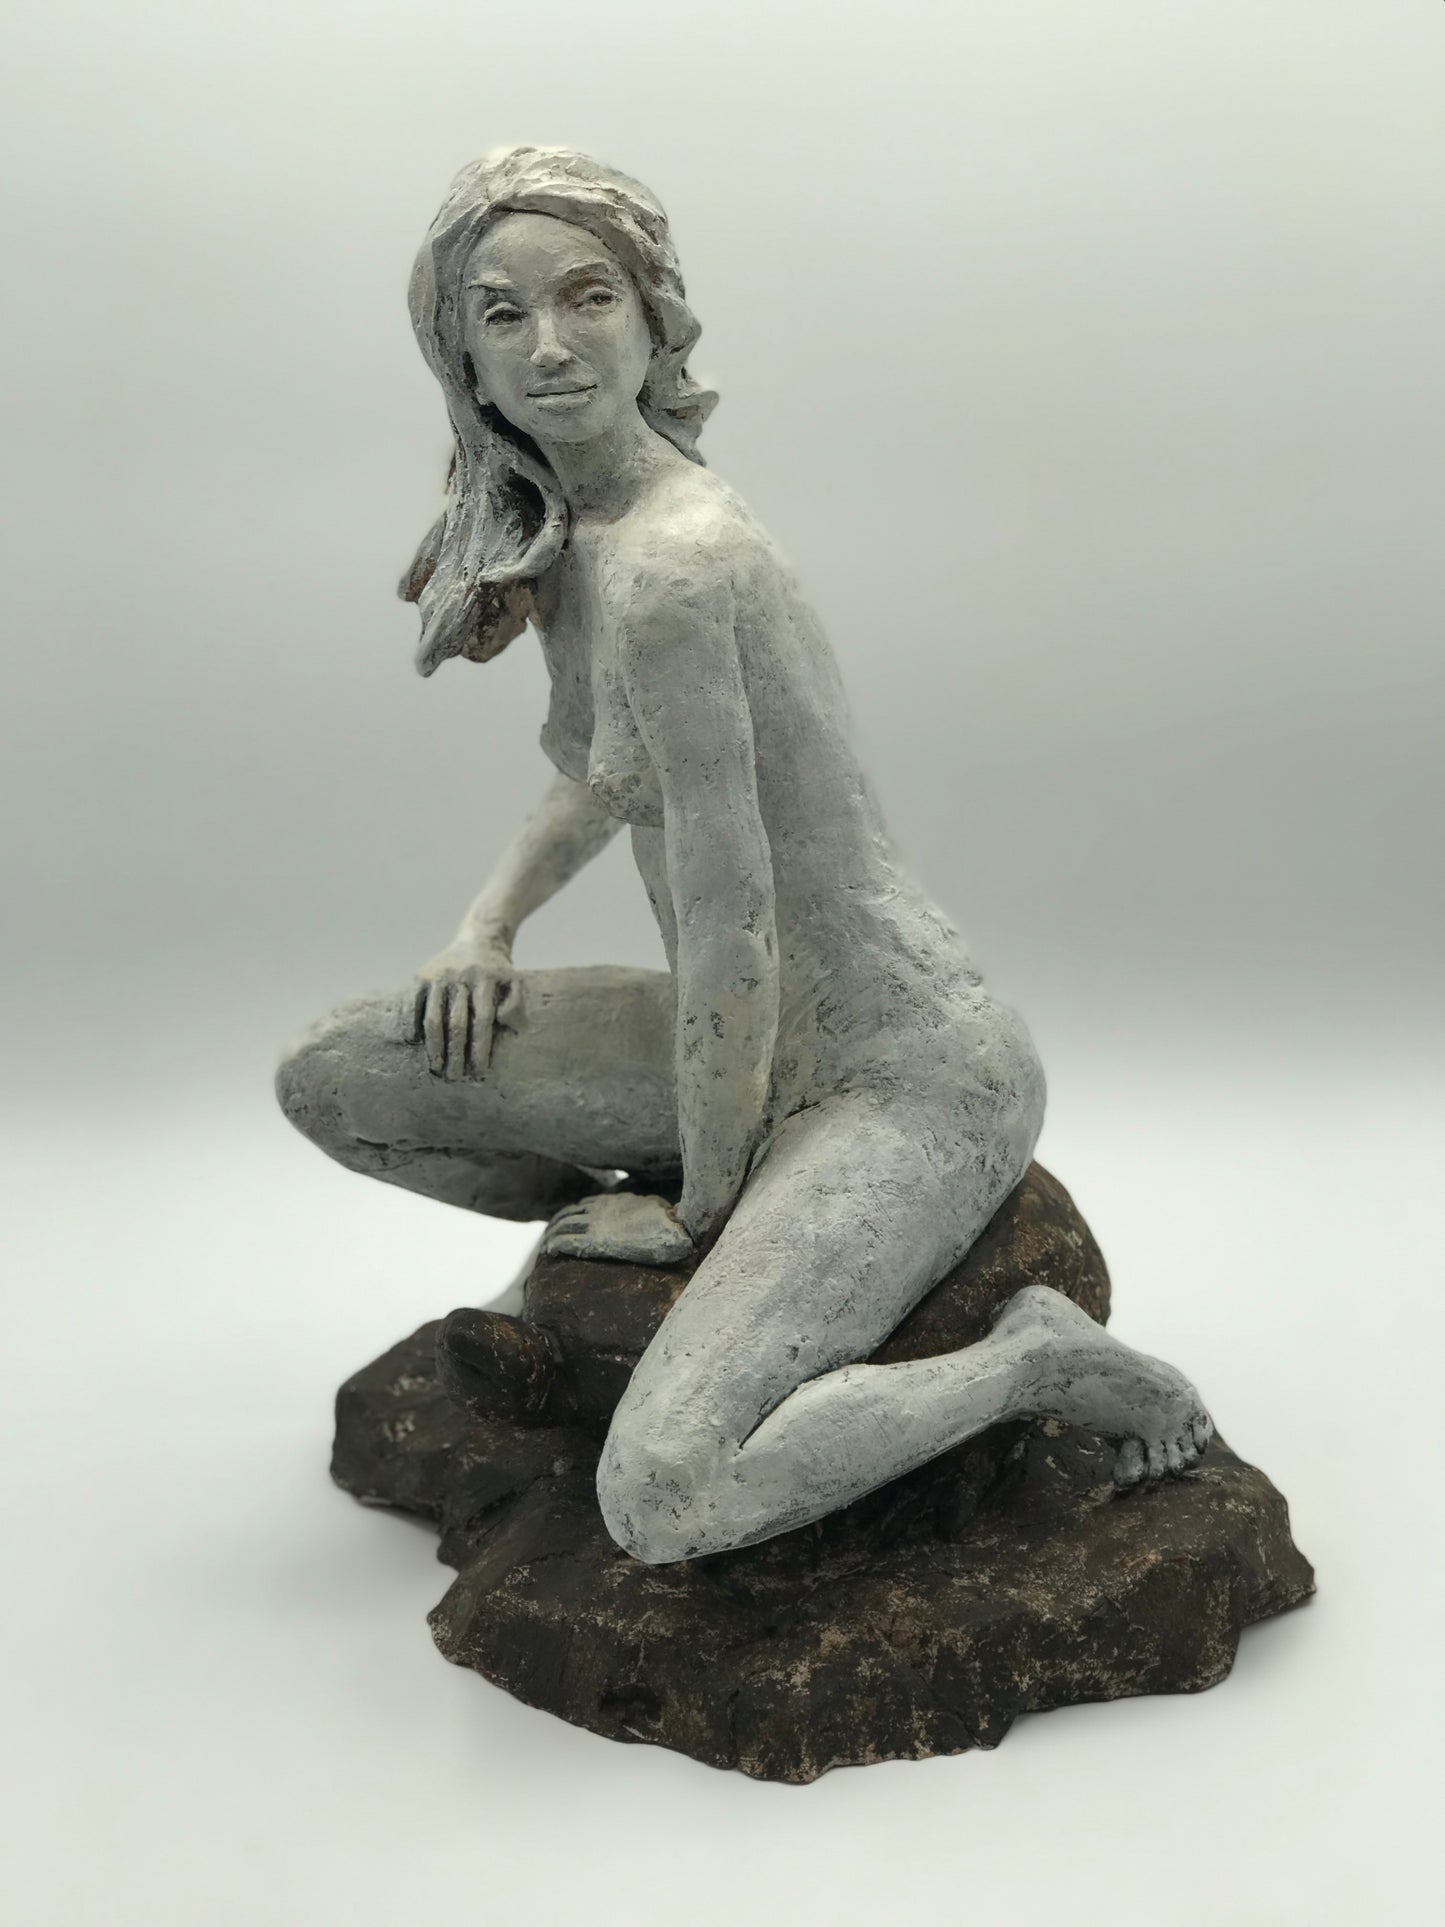 Side view of body and front view of face of a clay sculpture of a seated woman